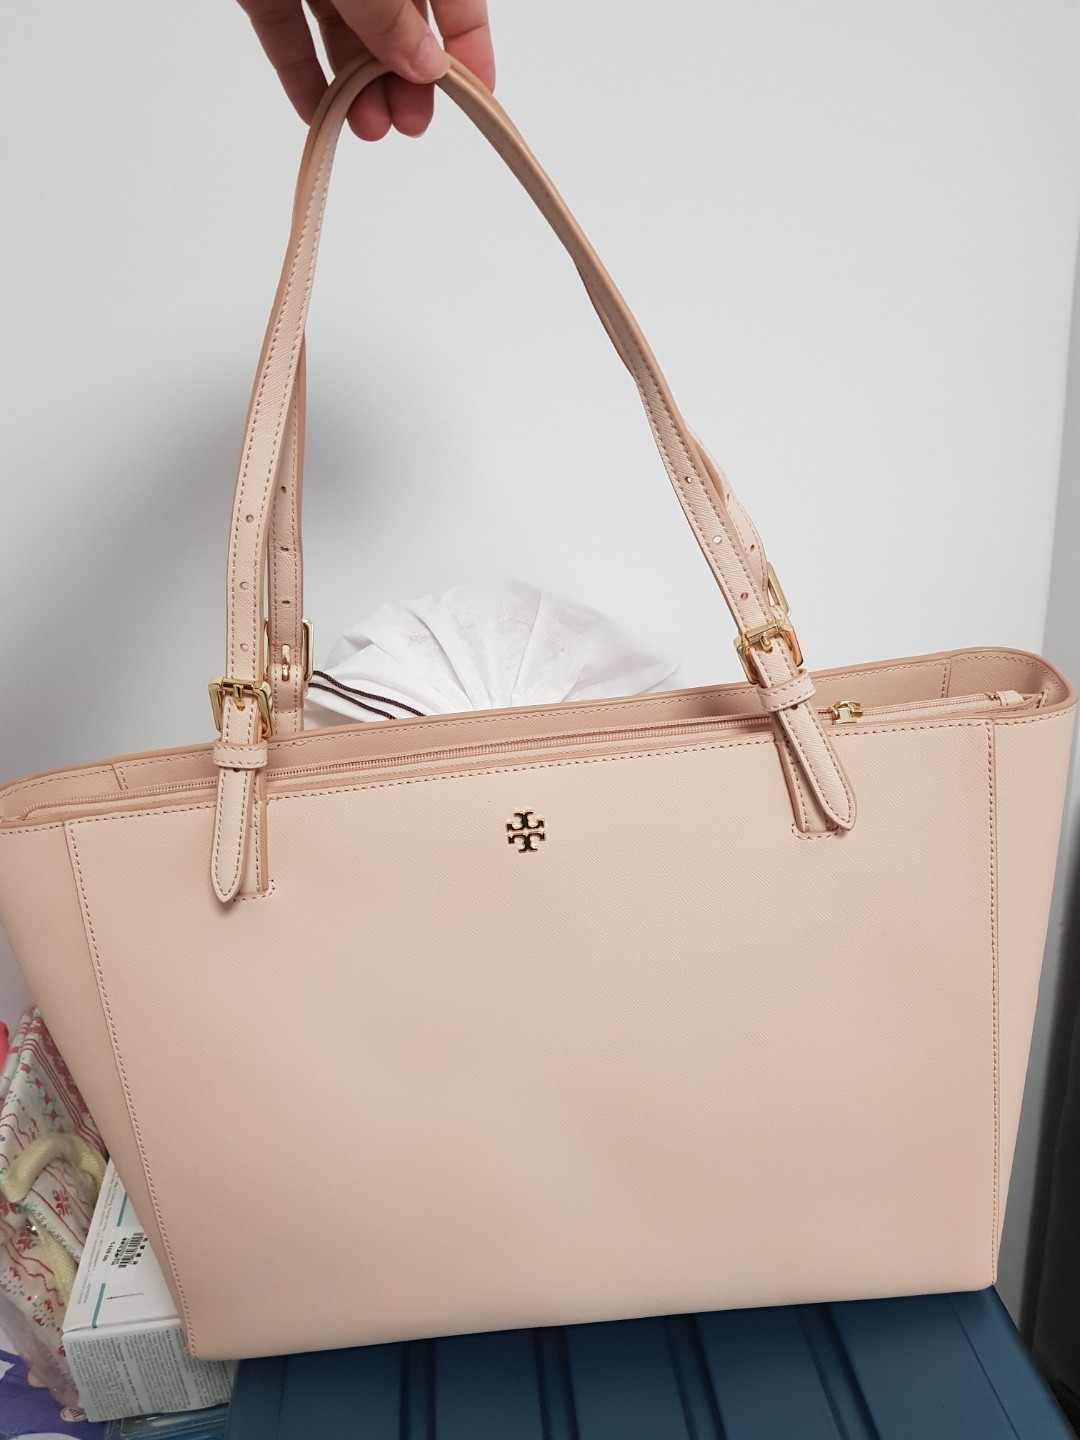 Tory Burch York Buckle Work Tote Review 